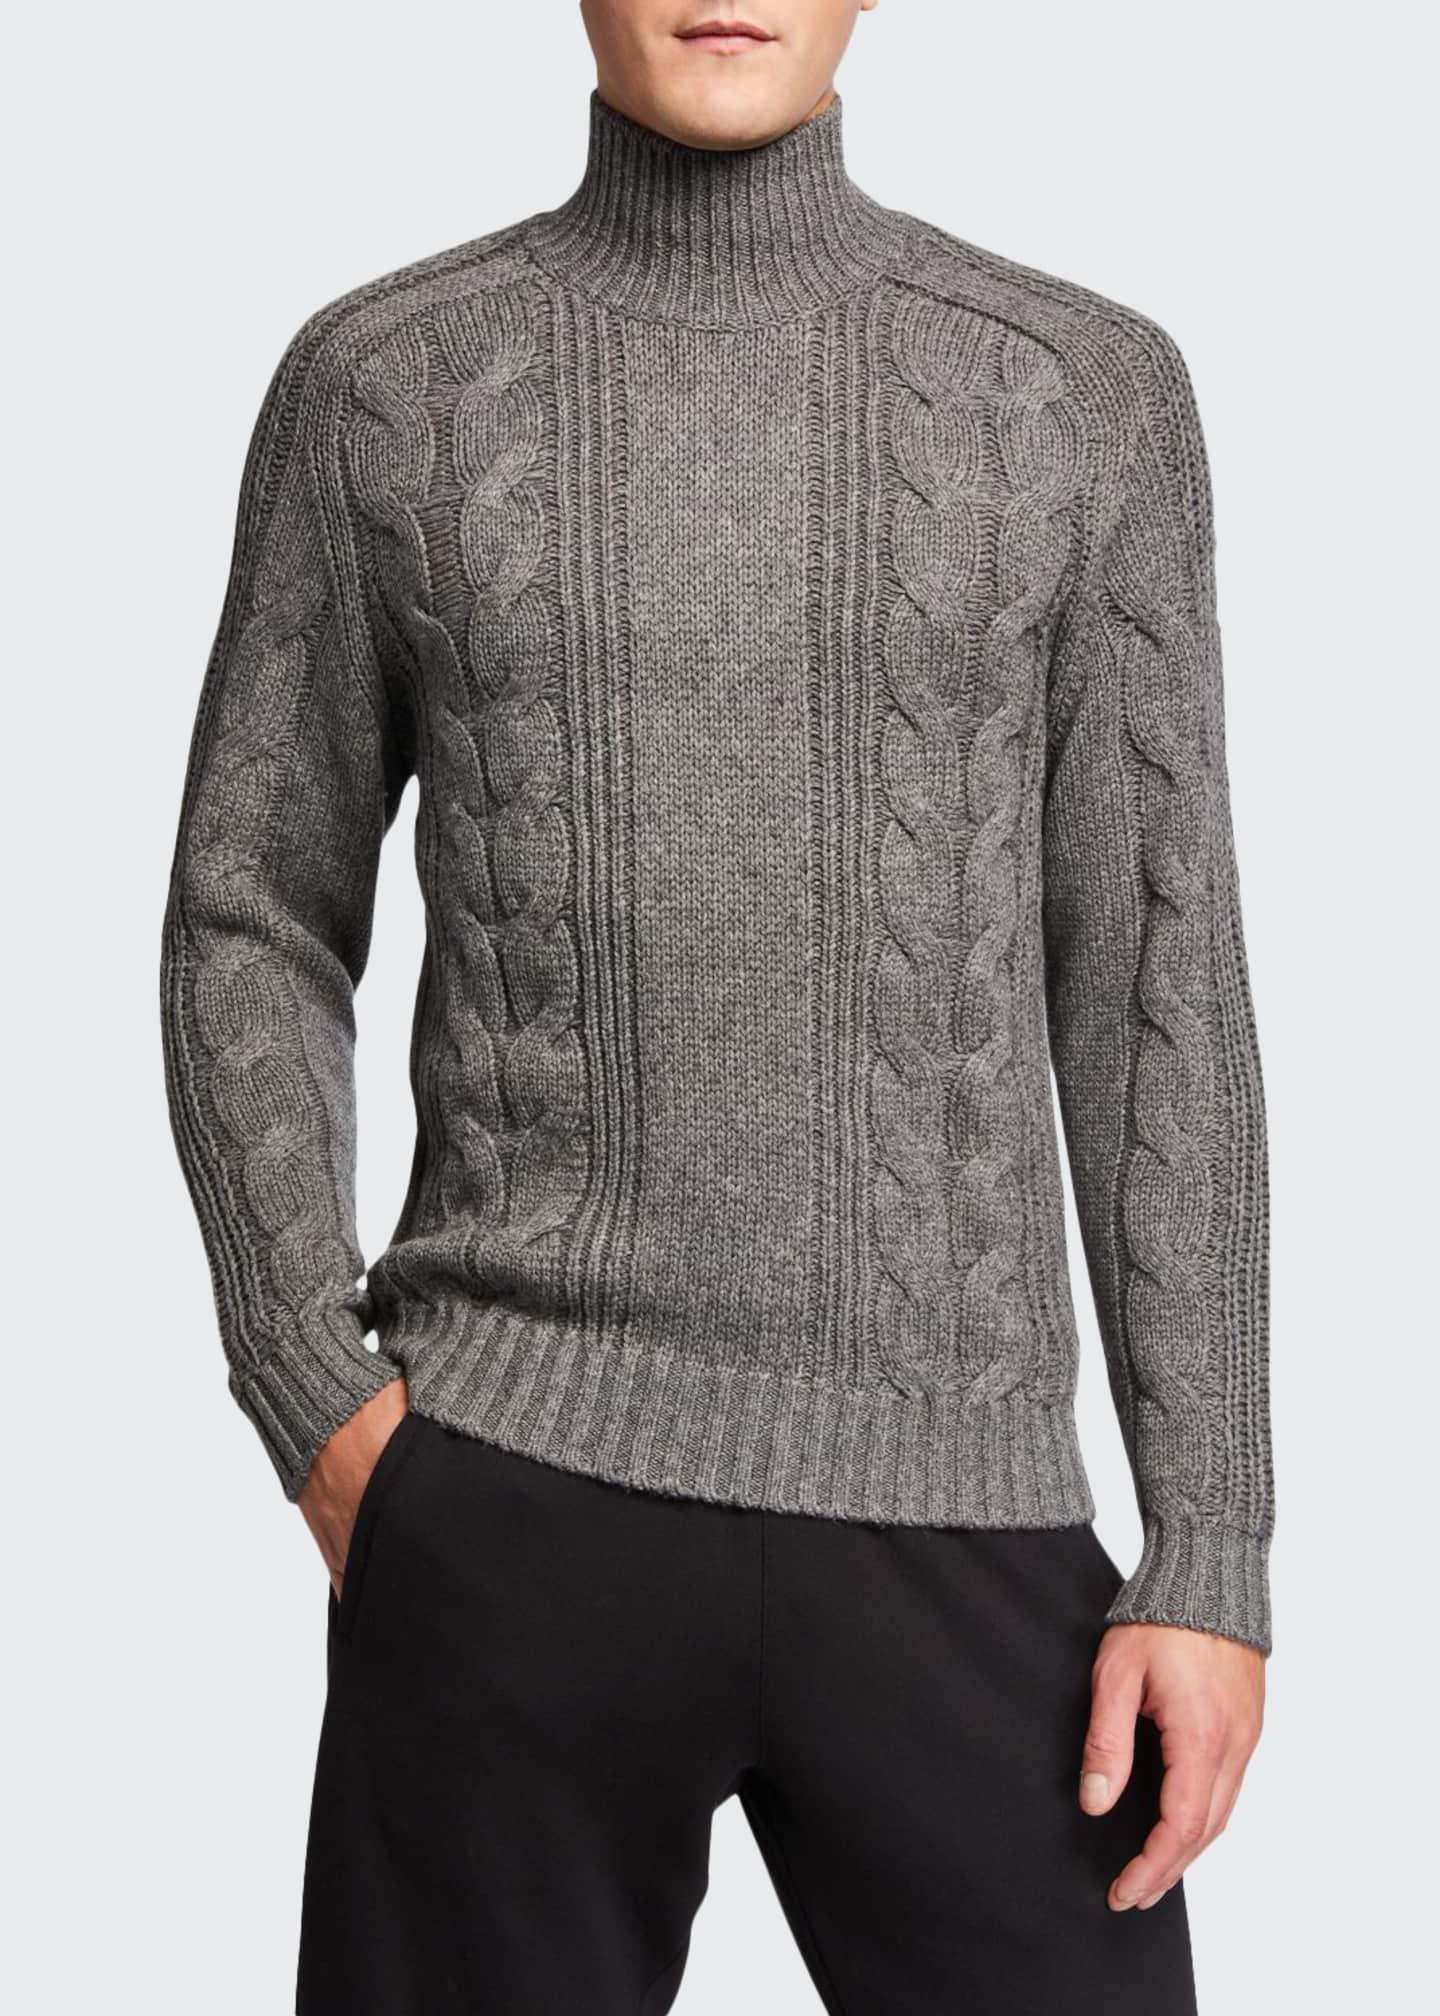 Vince Wool Men's Solid Cable-knit Turtleneck Sweater in Gray for Men - Lyst